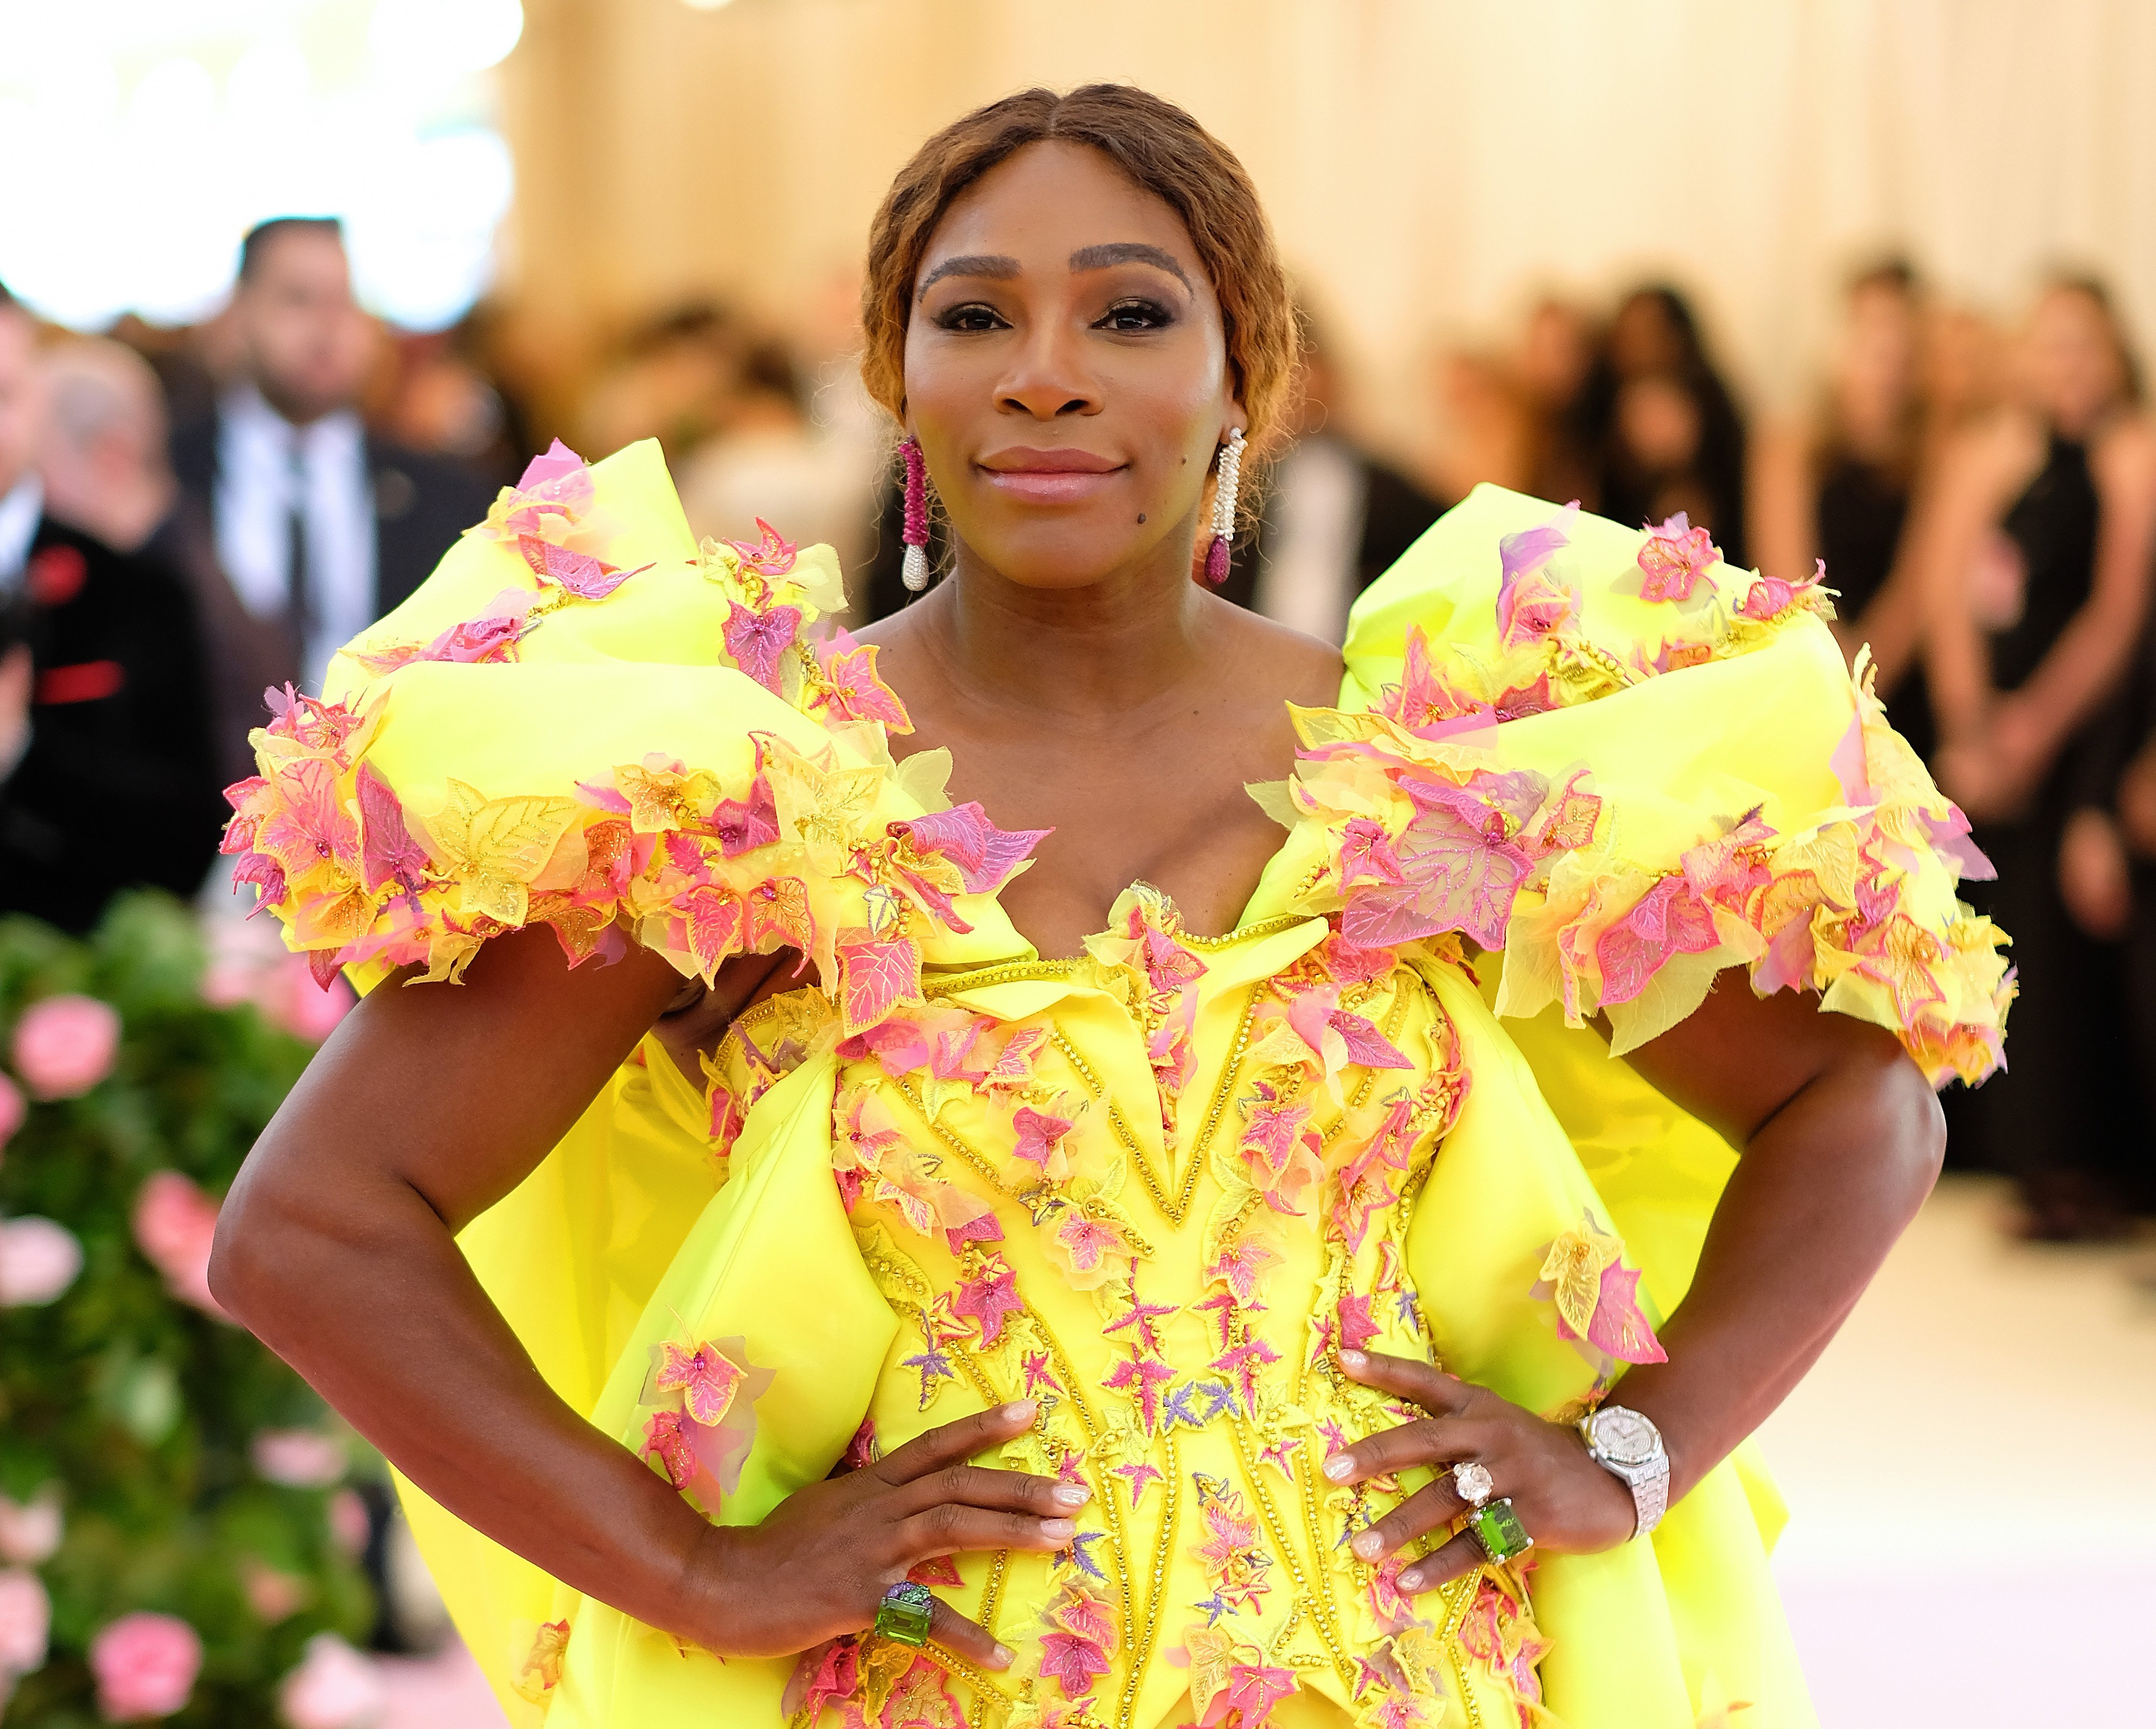 Serena Williams attends the 2019 Met Gala at The Metropolitan Museum of Art on May 6, 2019 in New York City. | Photo: Getty Images